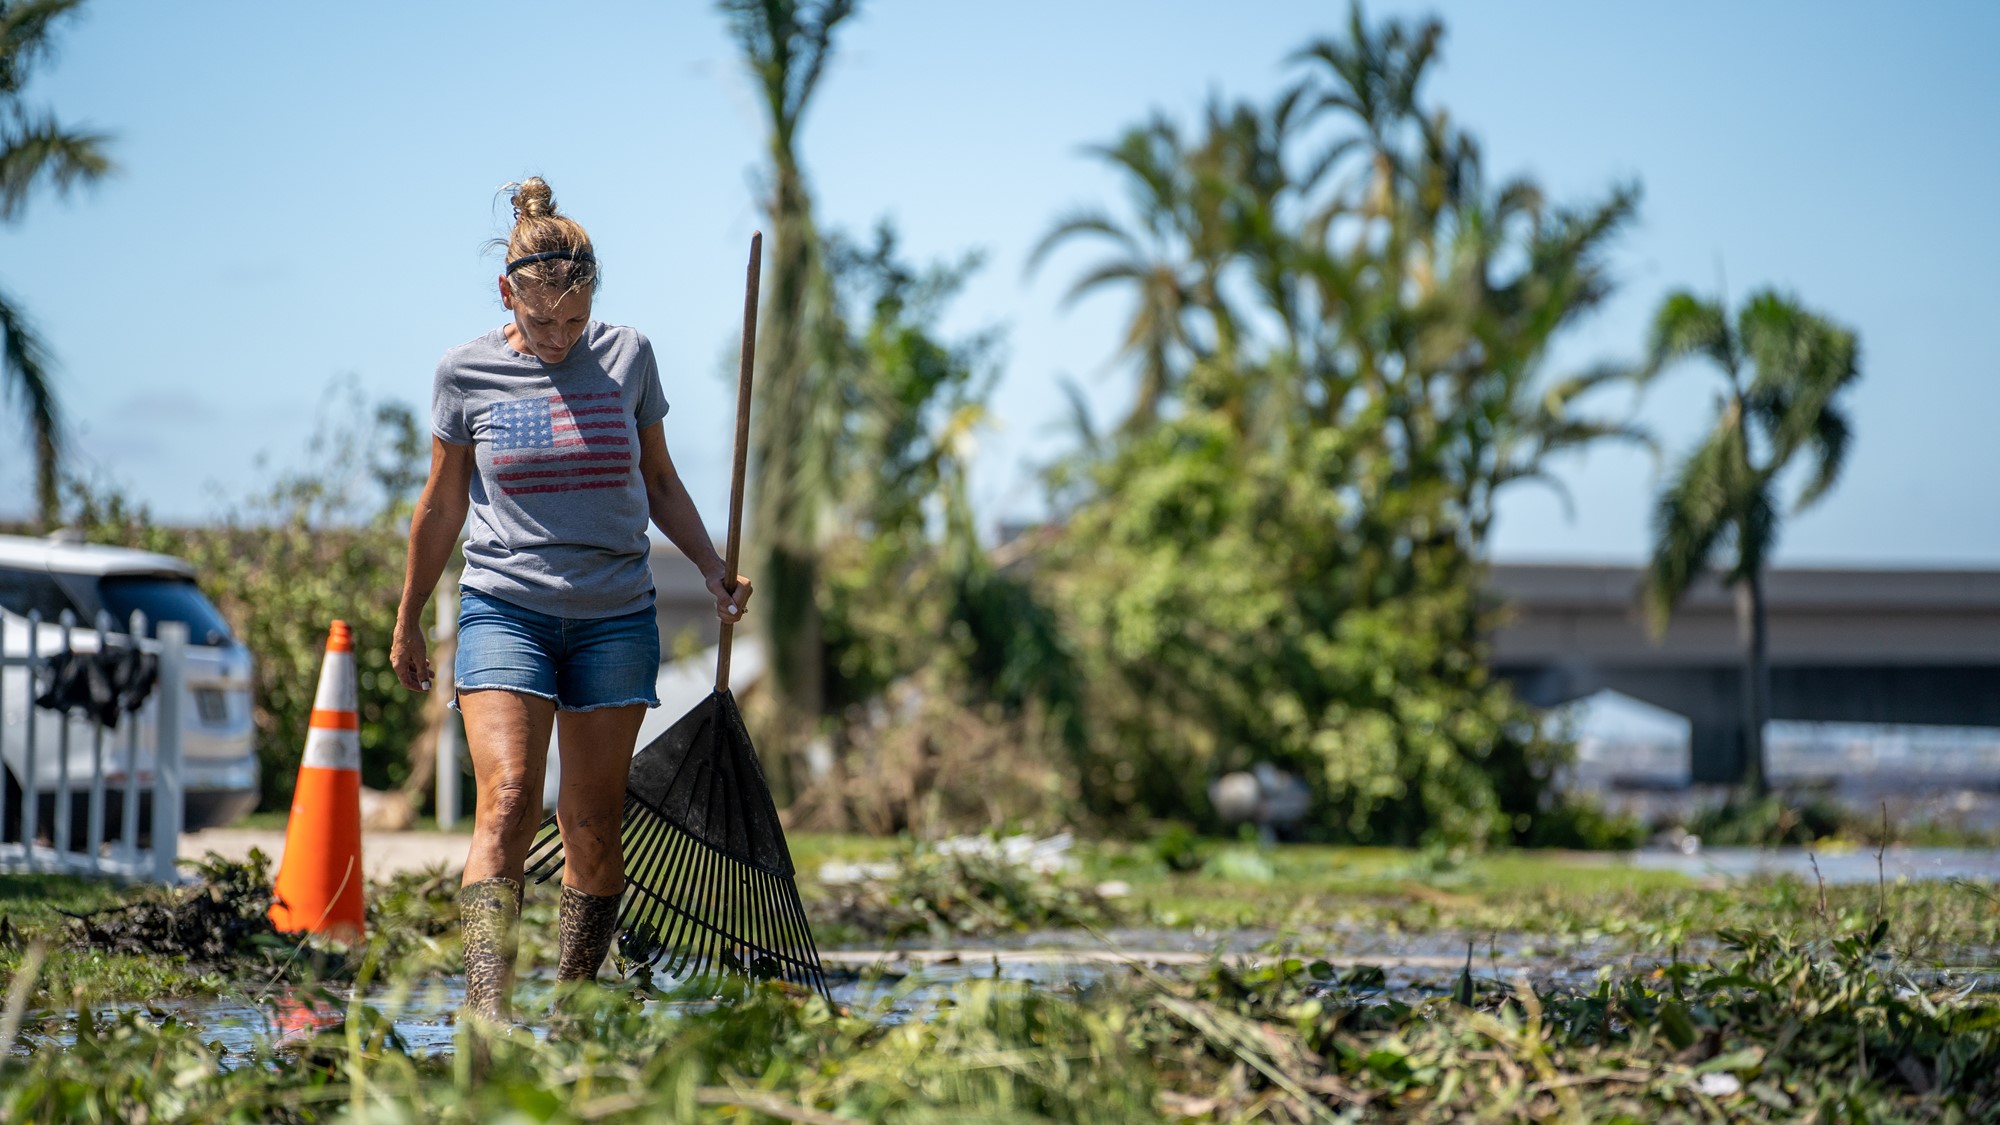 A woman holds a rake surrounded by green waste and debris.